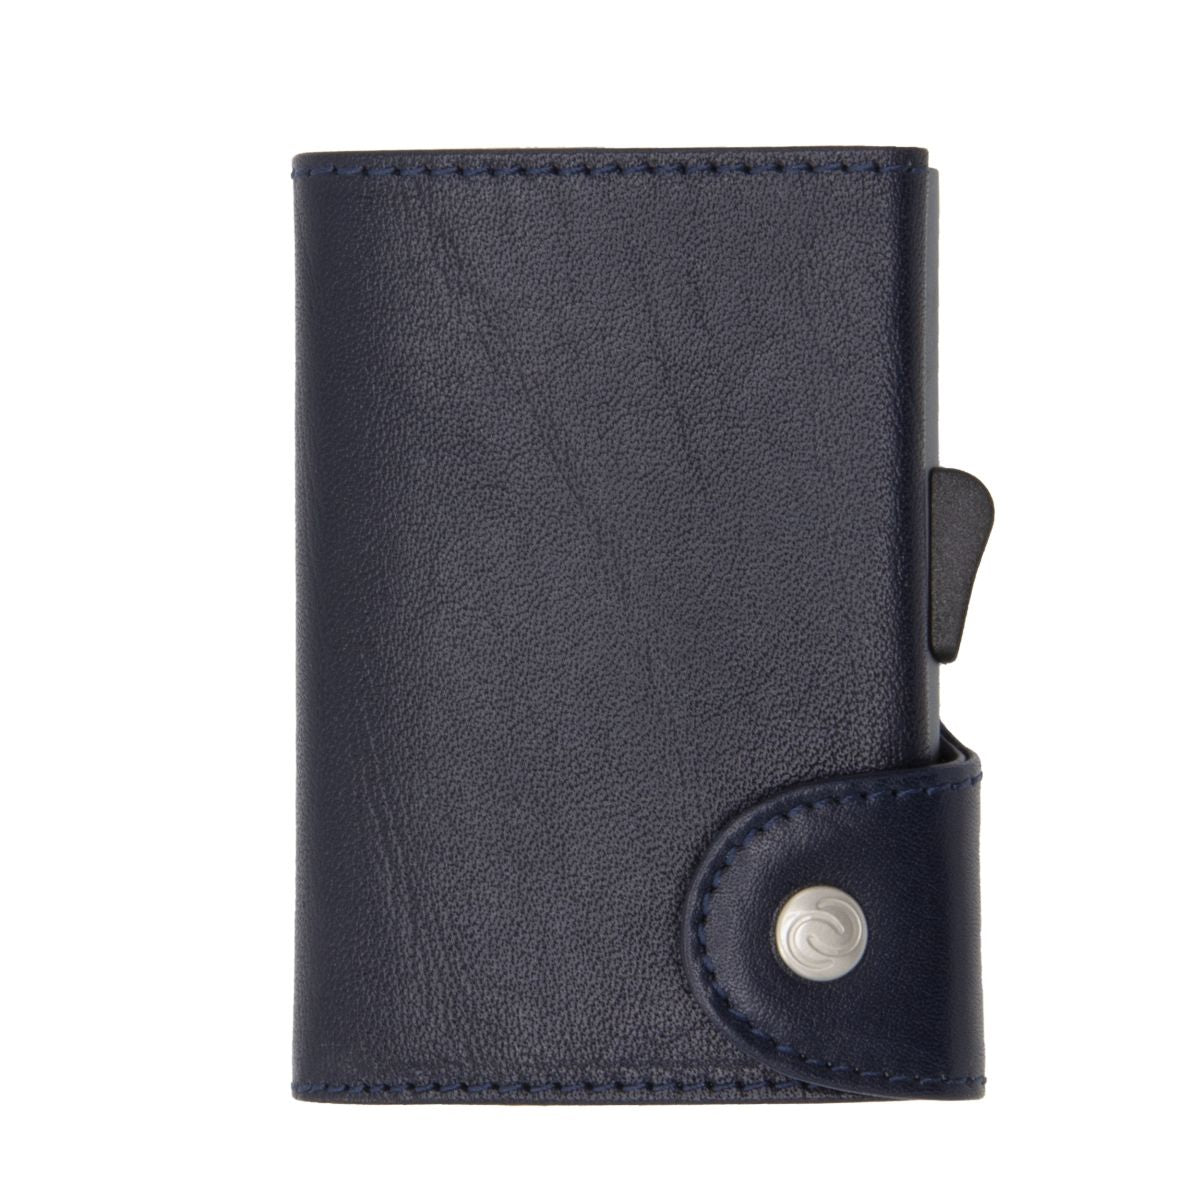 C-Secure Aluminum Card Holder with Genuine Leather - Blue Montana